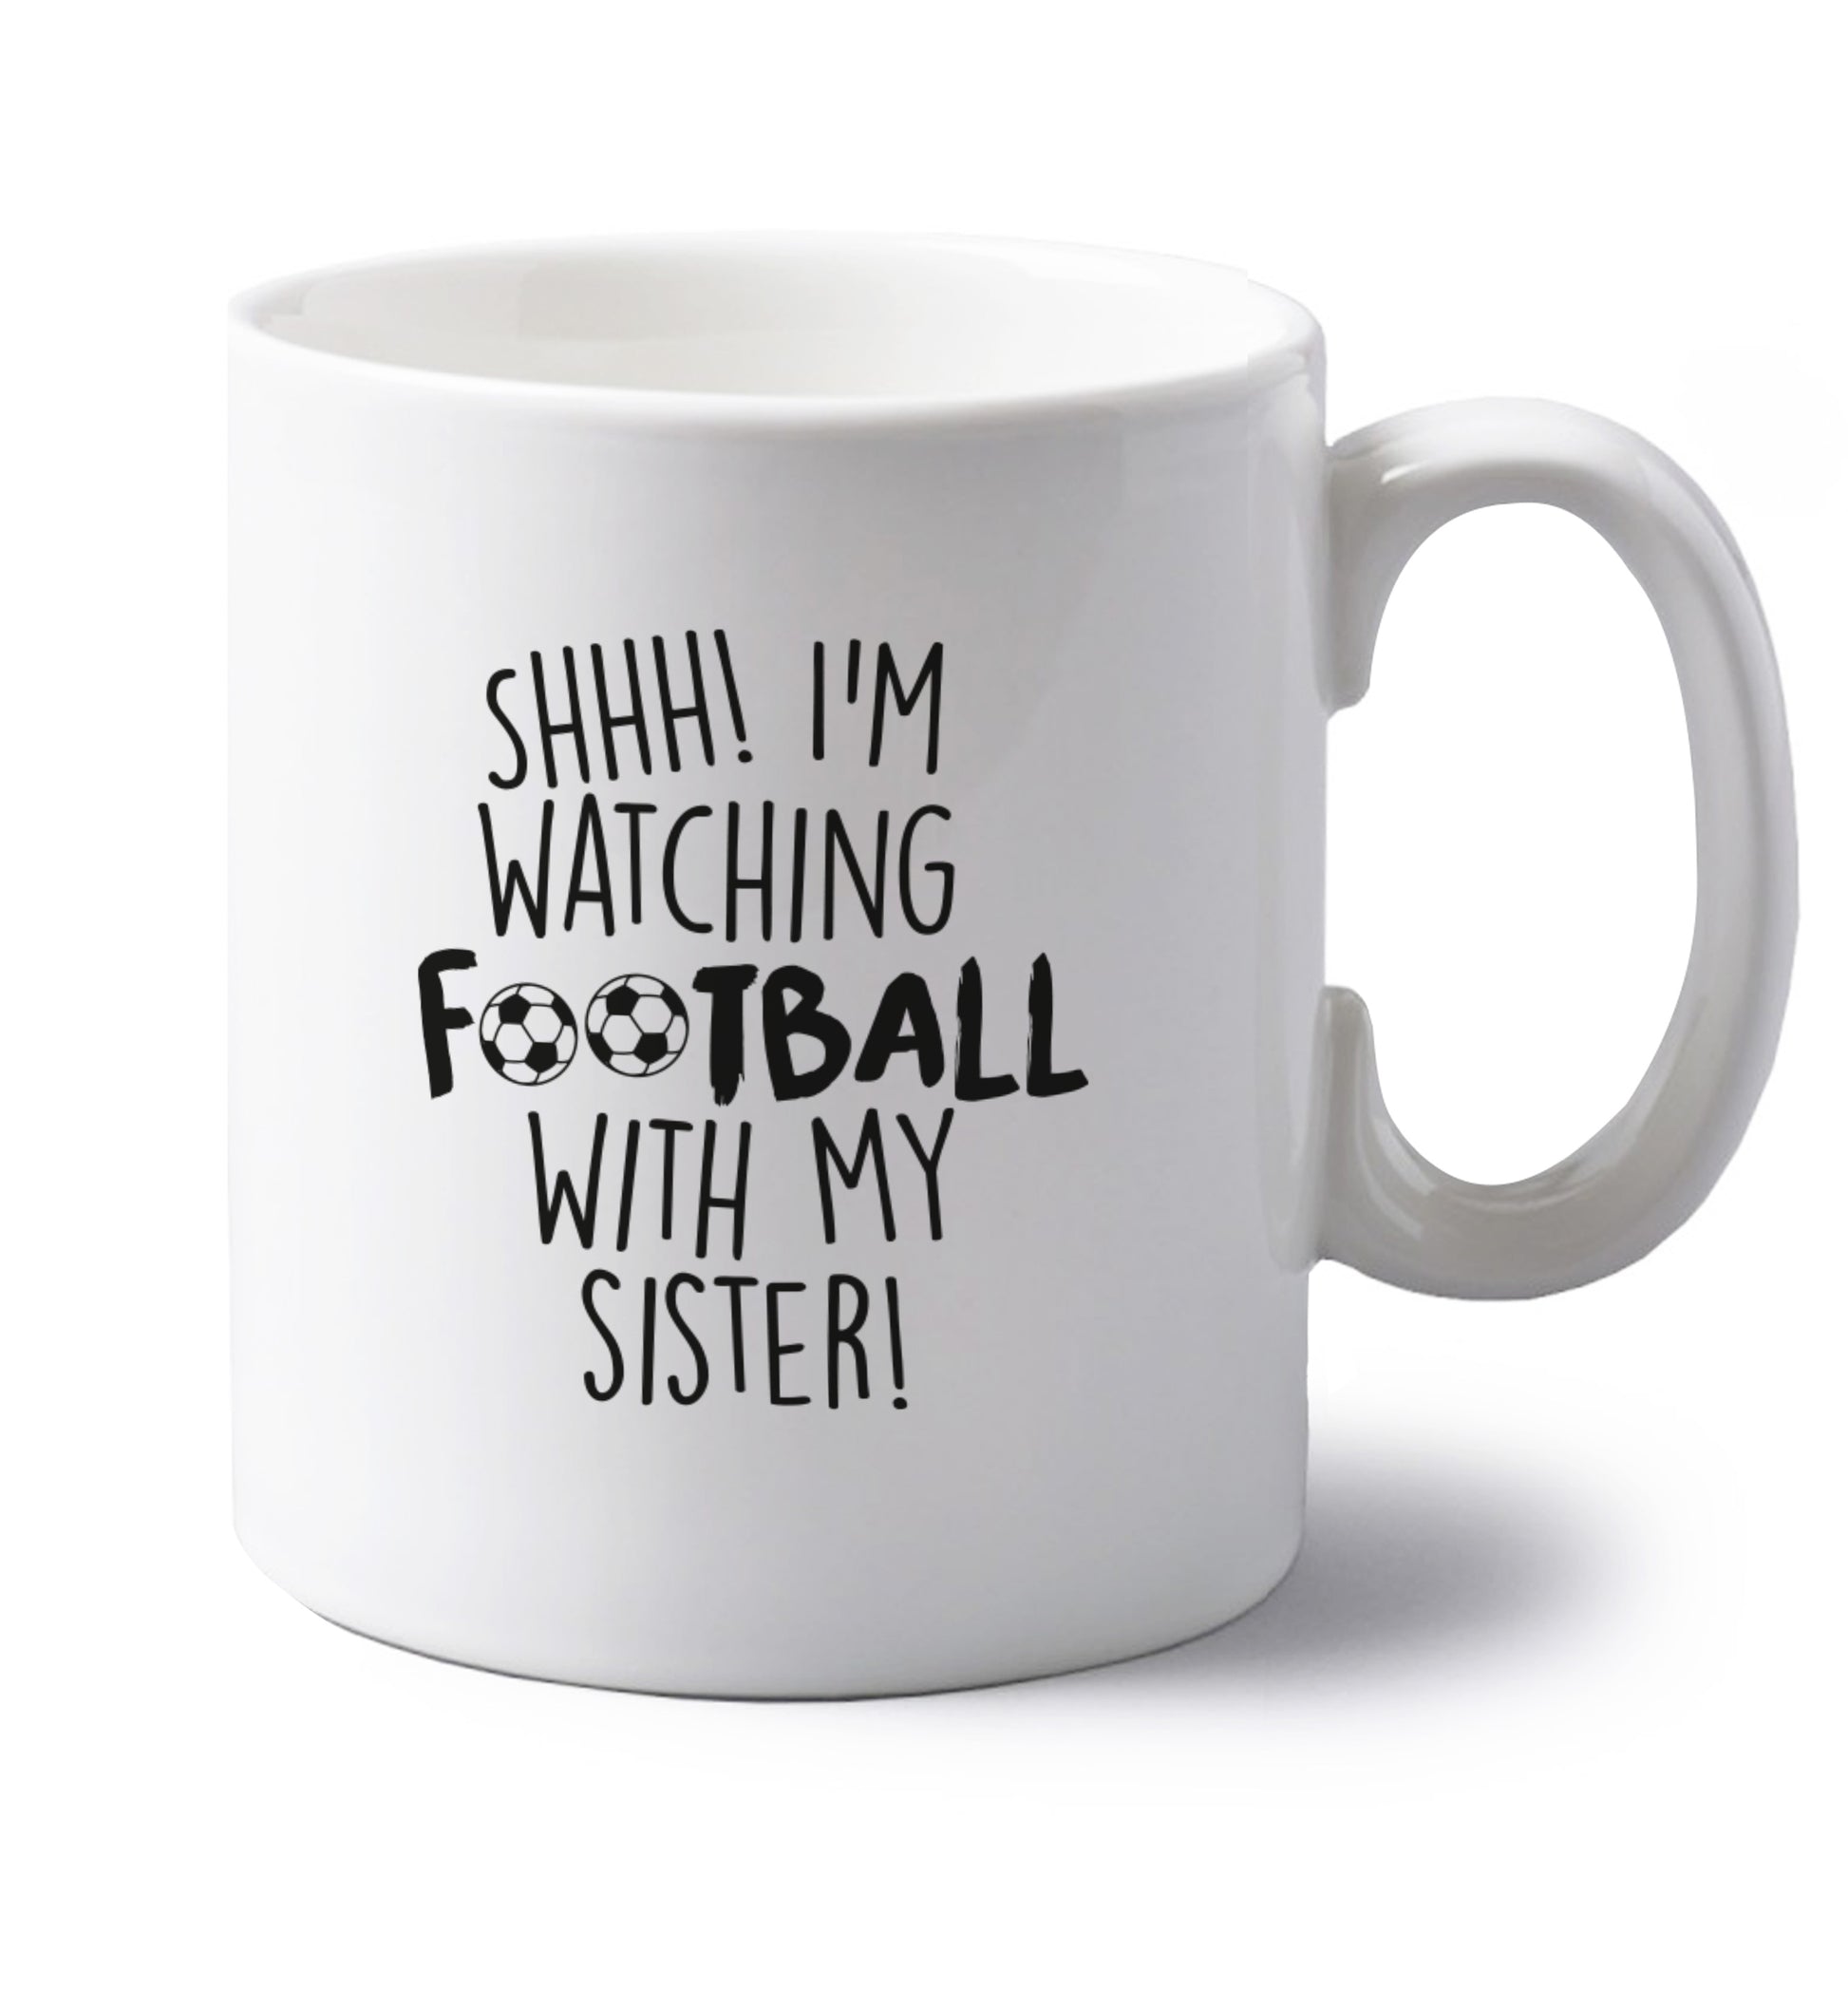 Shhh I'm watching football with my sister left handed white ceramic mug 